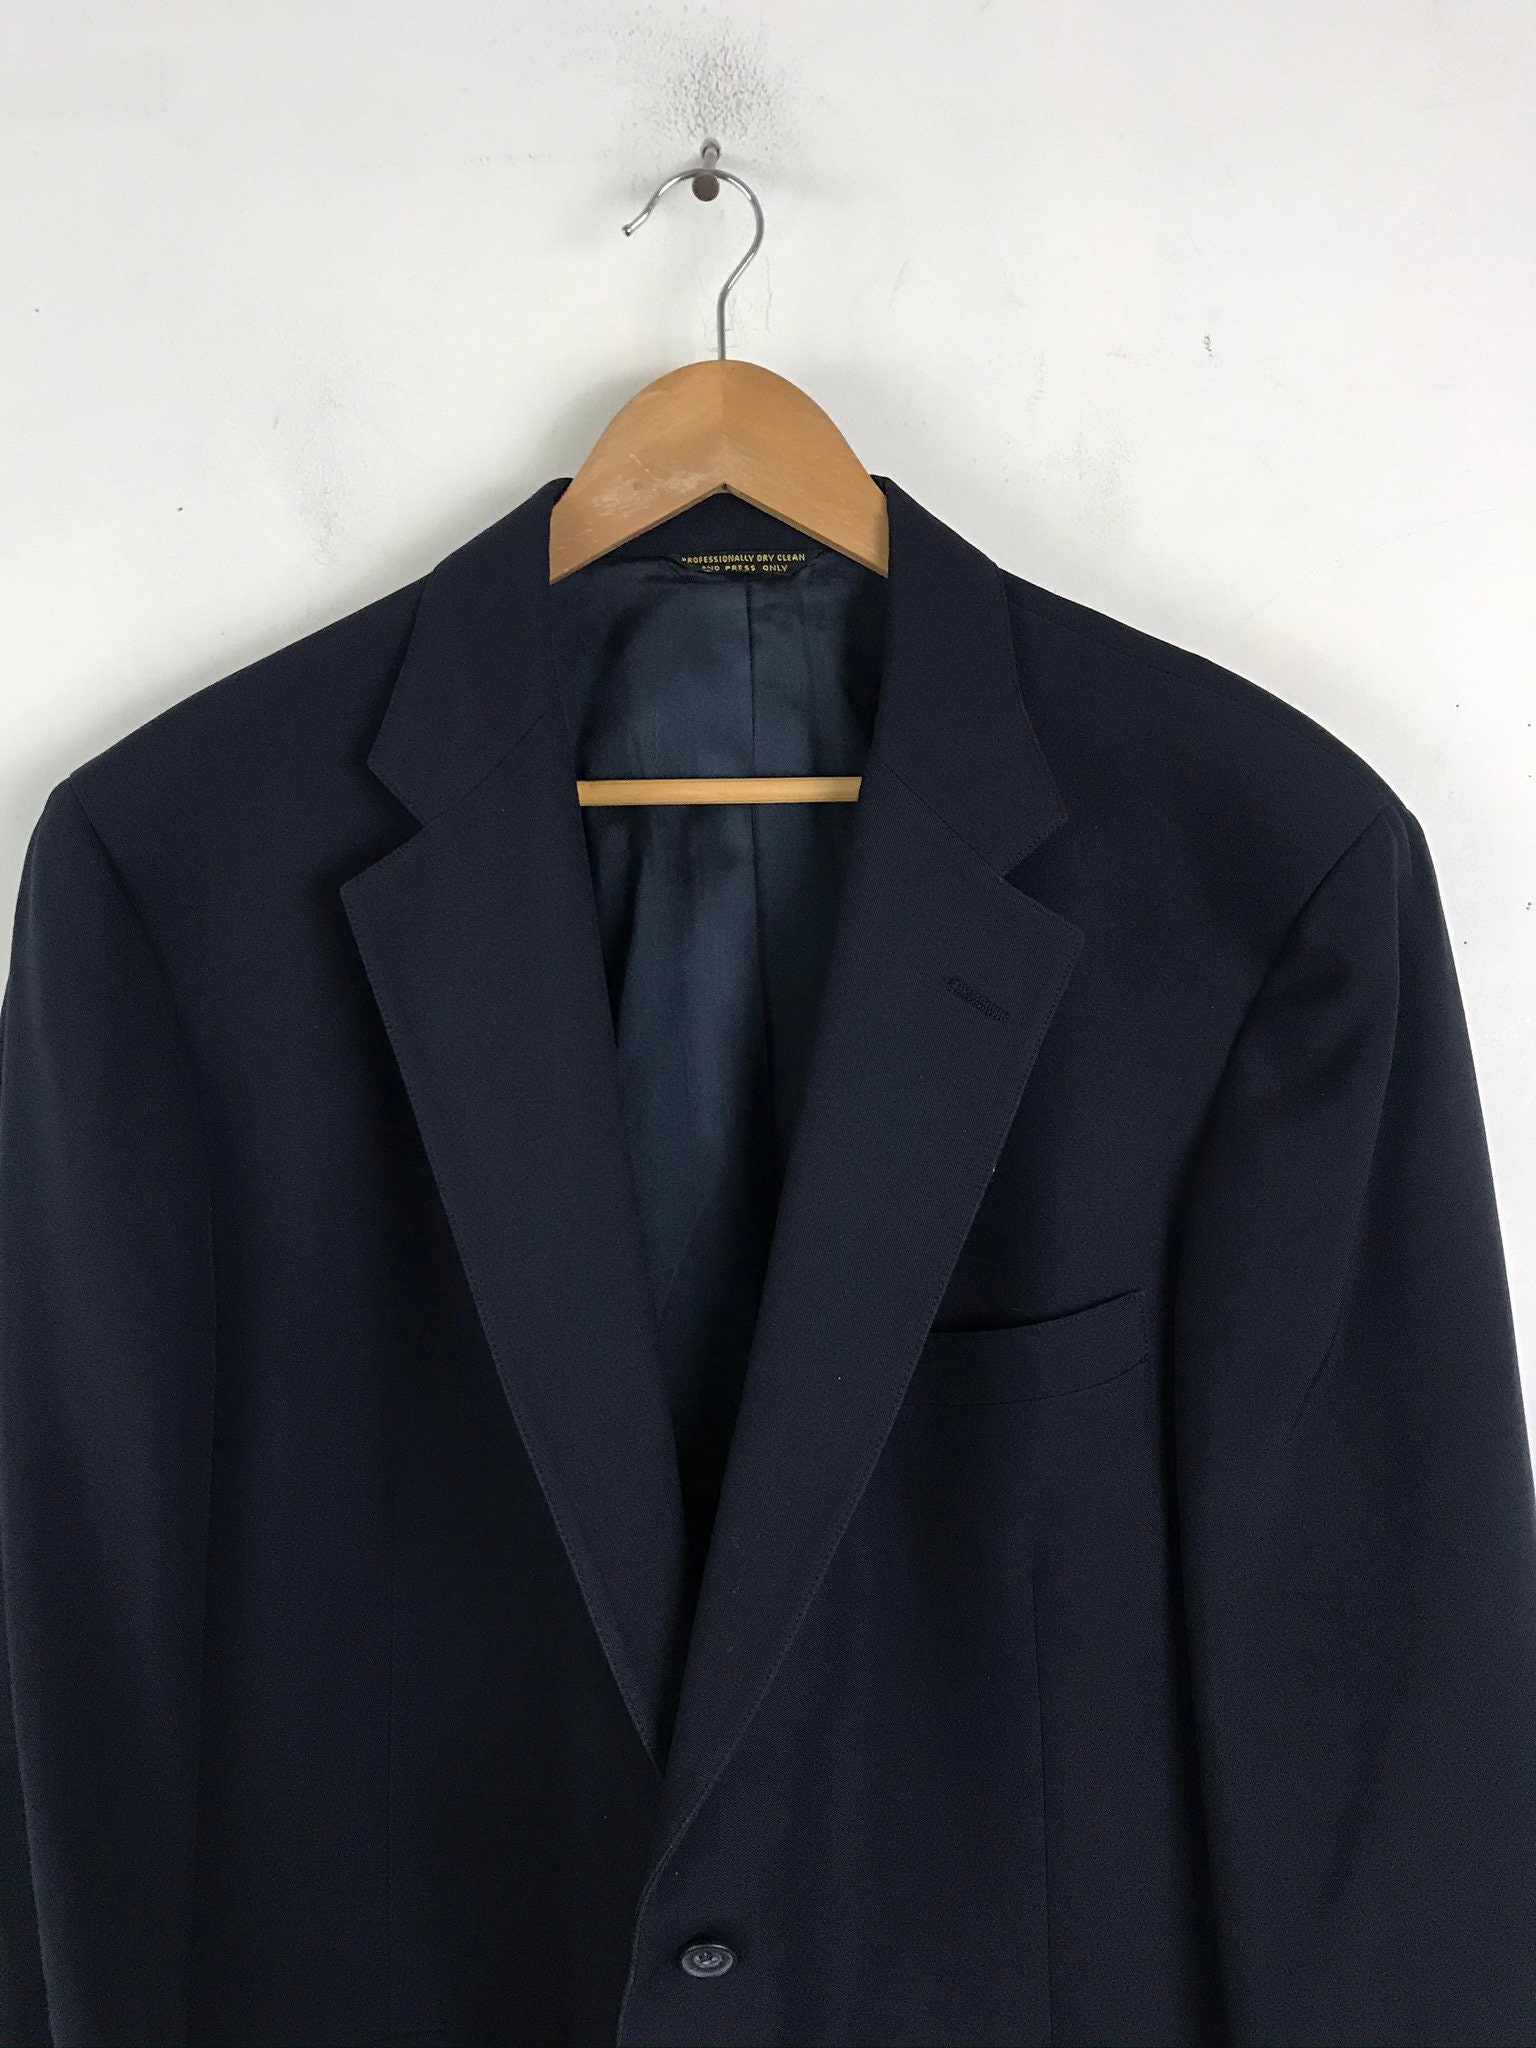 80s Dark Blue Two Piece Suit Mens Size 46 & 42W Classic Navy | Etsy